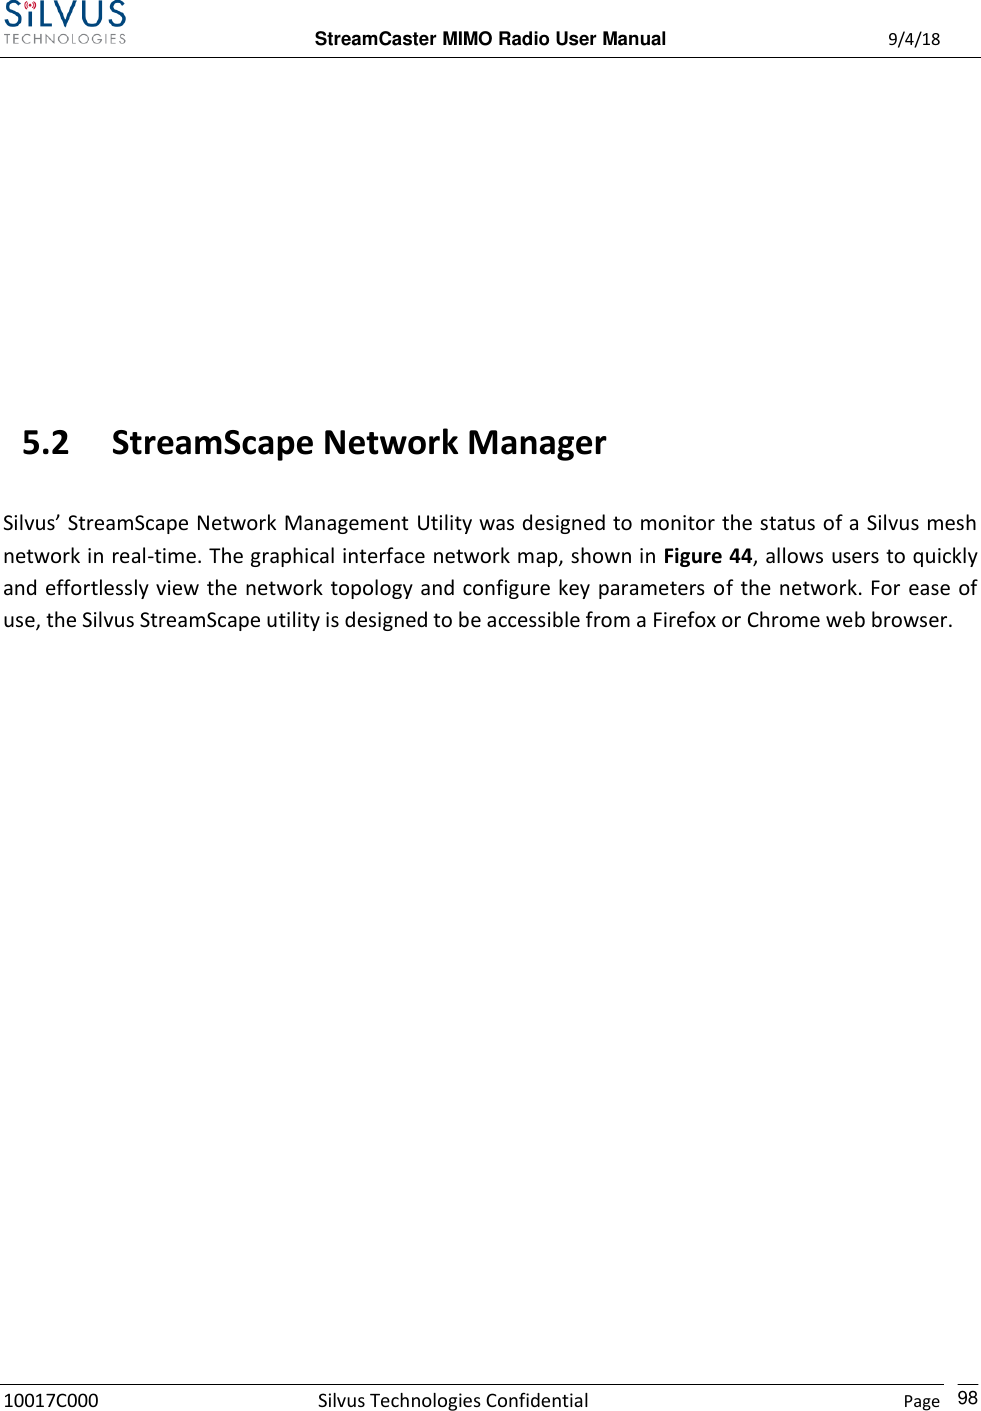  StreamCaster MIMO Radio User Manual  9/4/18 10017C000 Silvus Technologies Confidential    Page    98       5.2 StreamScape Network Manager  Silvus’ StreamScape Network Management Utility was designed to monitor the status of a Silvus mesh network in real-time. The graphical interface network map, shown in Figure 44, allows users to quickly and effortlessly view the network topology and configure key parameters of the network. For ease of use, the Silvus StreamScape utility is designed to be accessible from a Firefox or Chrome web browser.  